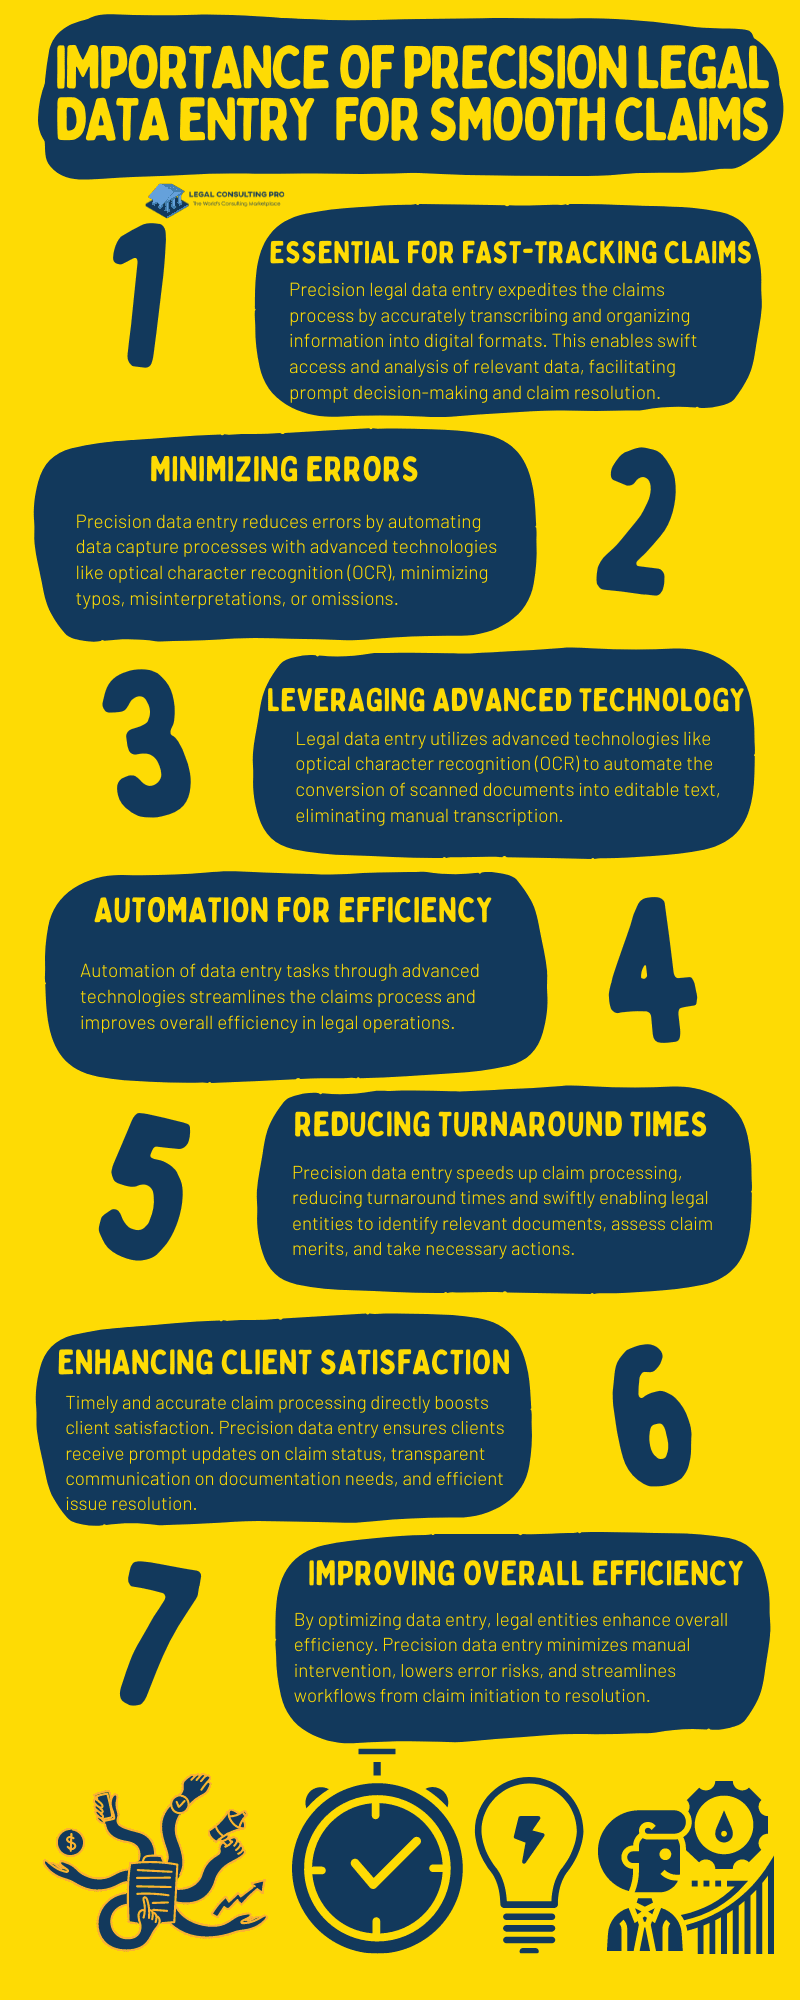 Importance of Precision Legal Data Entry for smooth claims Infographic